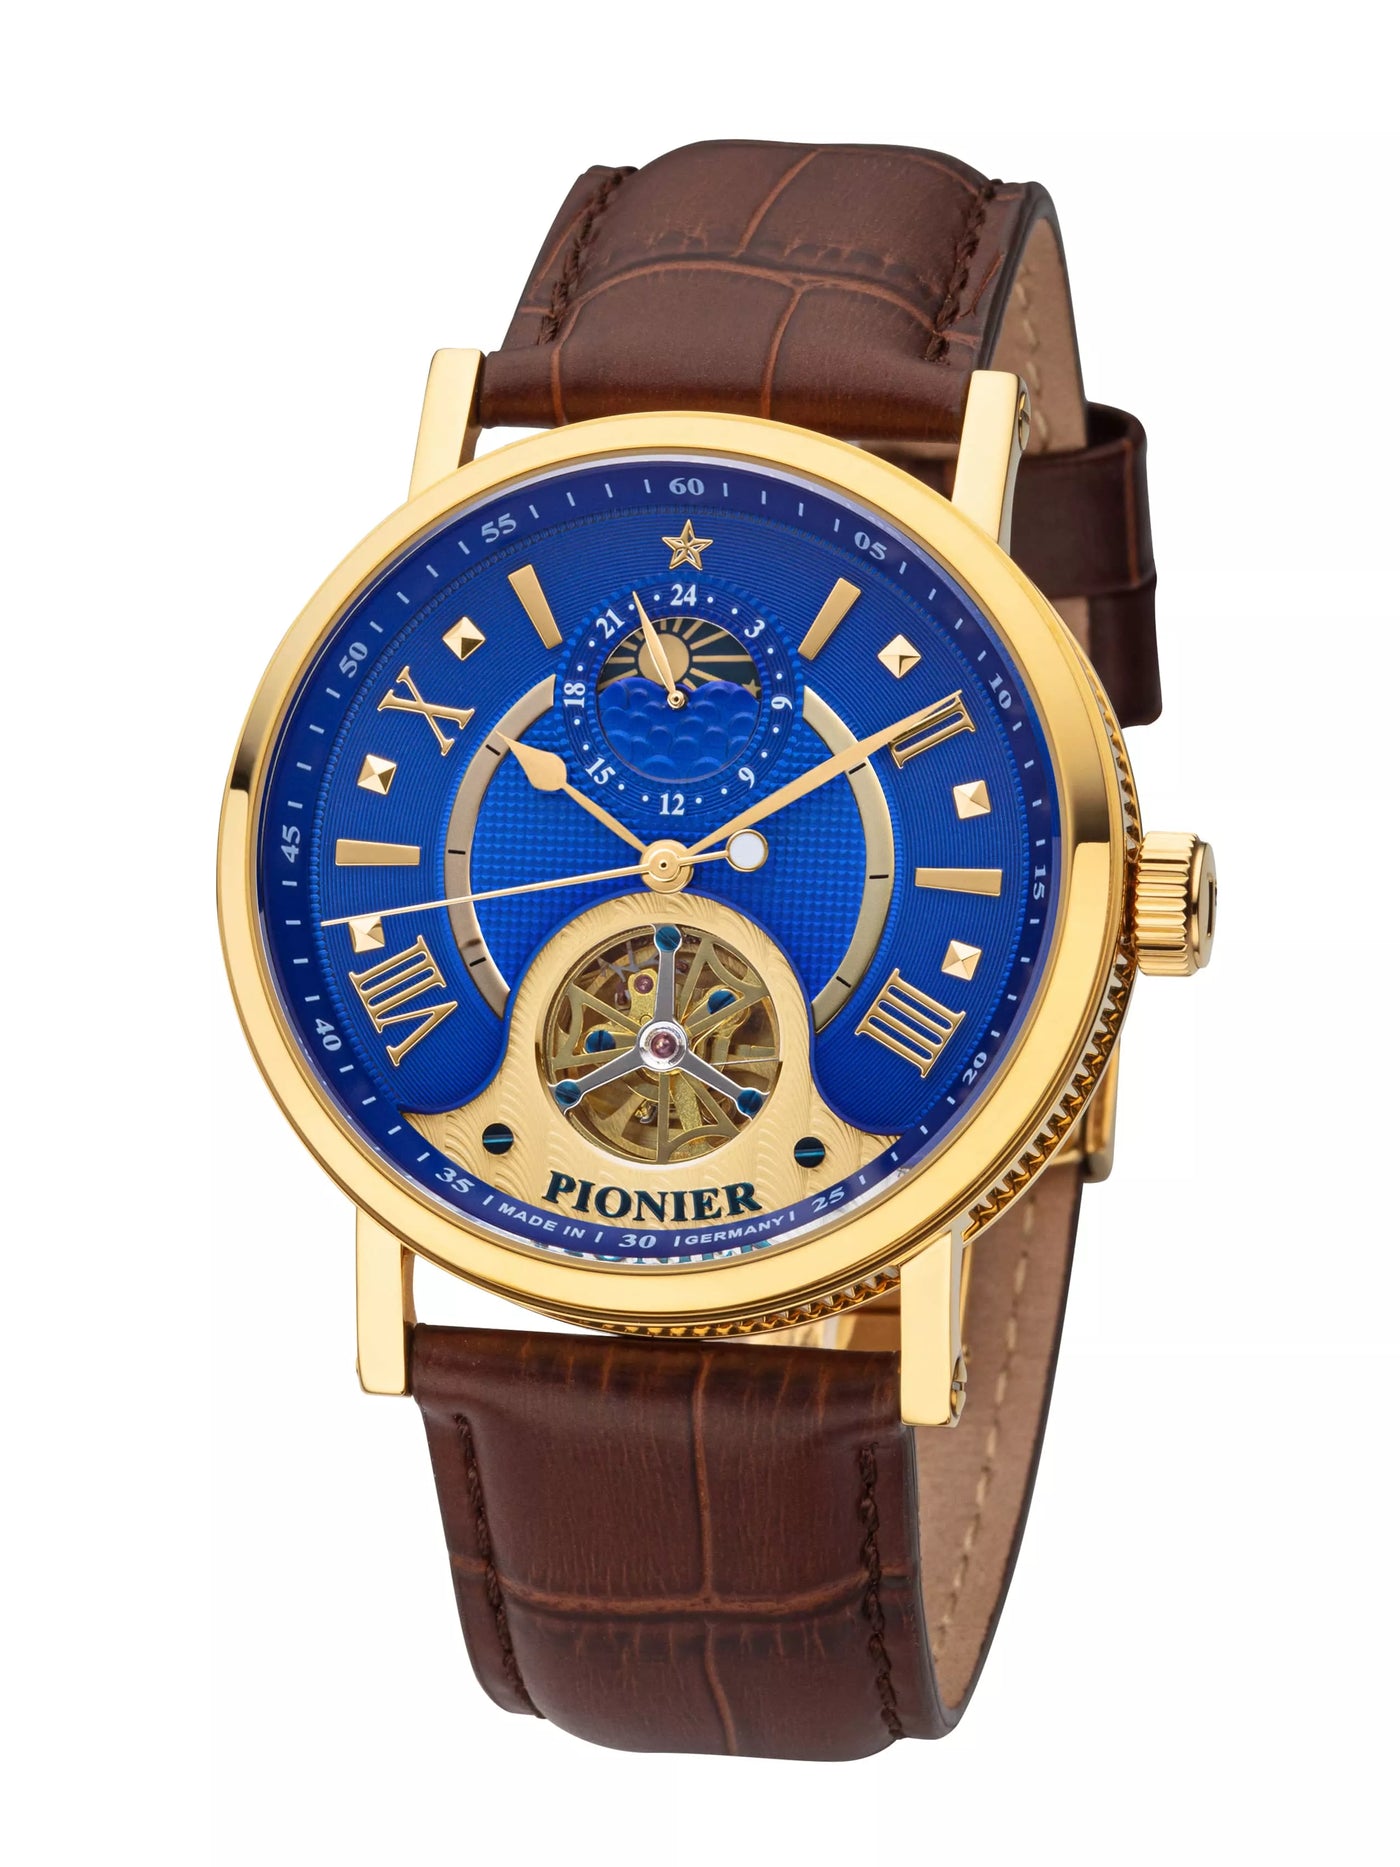 Boston Pionier GM-518-4 blue dial with gold case and brown leather band.